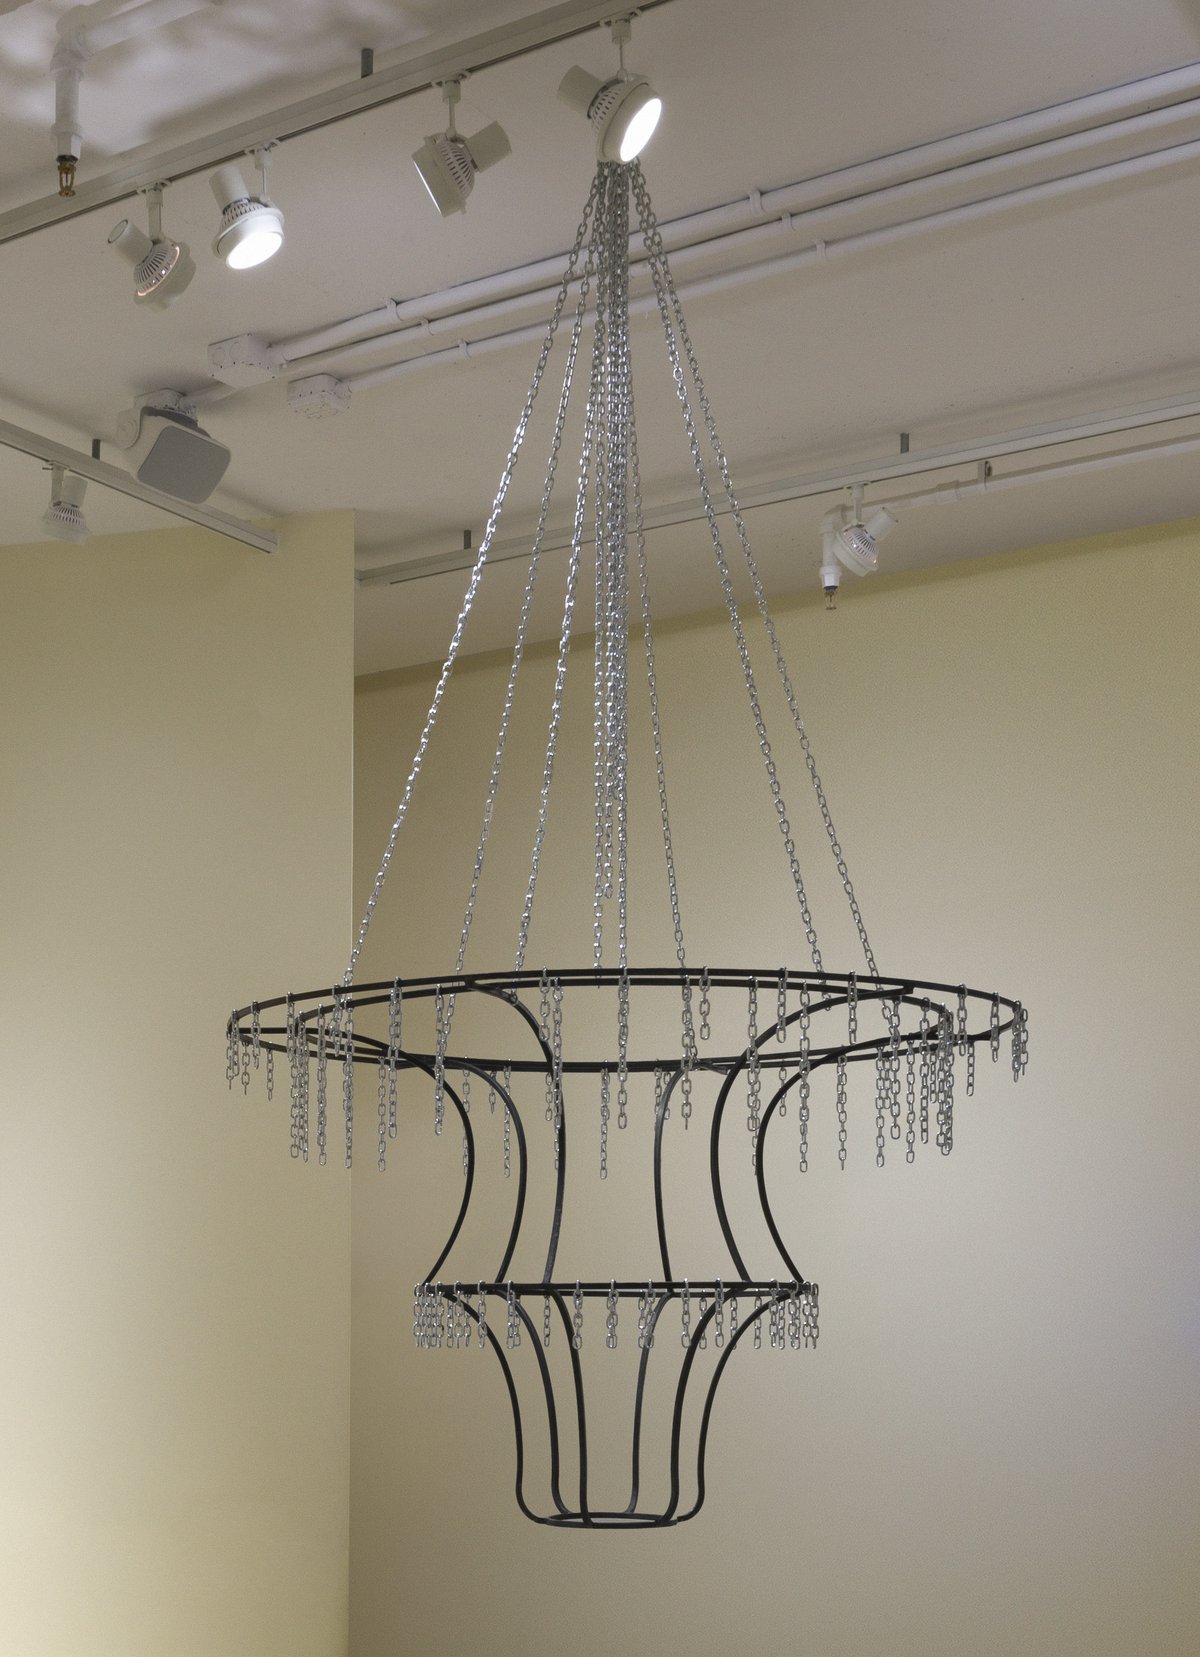 Benjamin HirteGhost, 2019Steel, bluing stain, chrome plated chains⌀ 125 x 250 cmLife and Limbs, Swiss Institute, New York, 2019